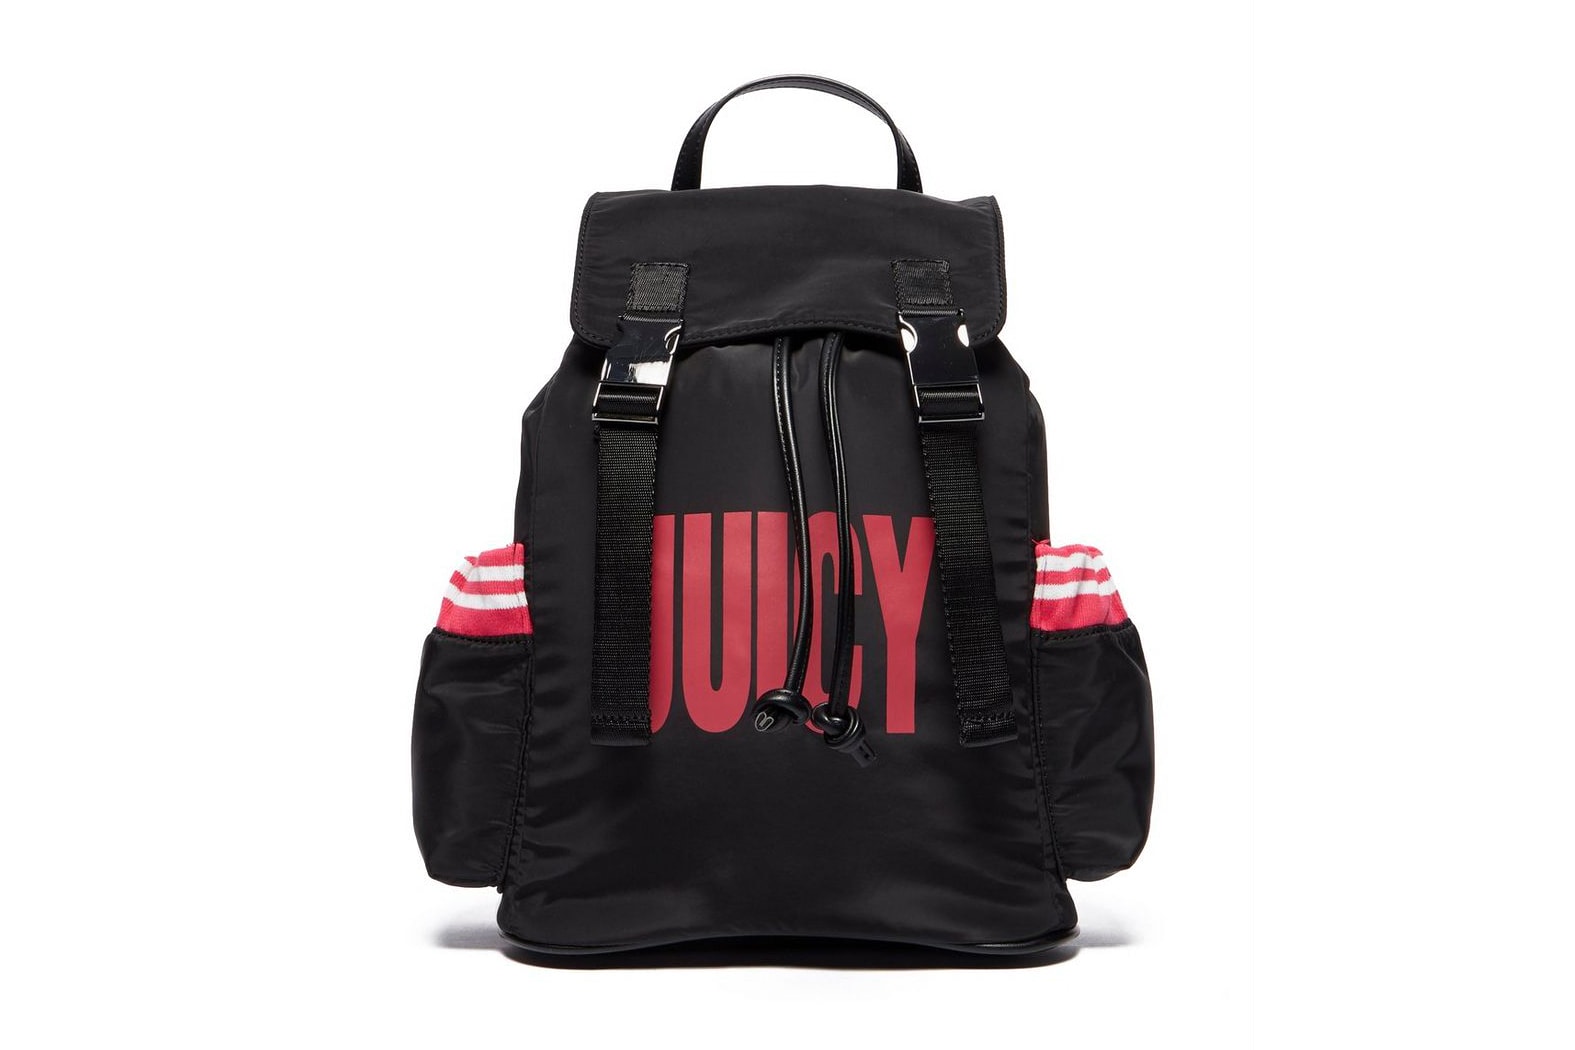 Juicy Couture Releases Hot Pink Logo Backpack